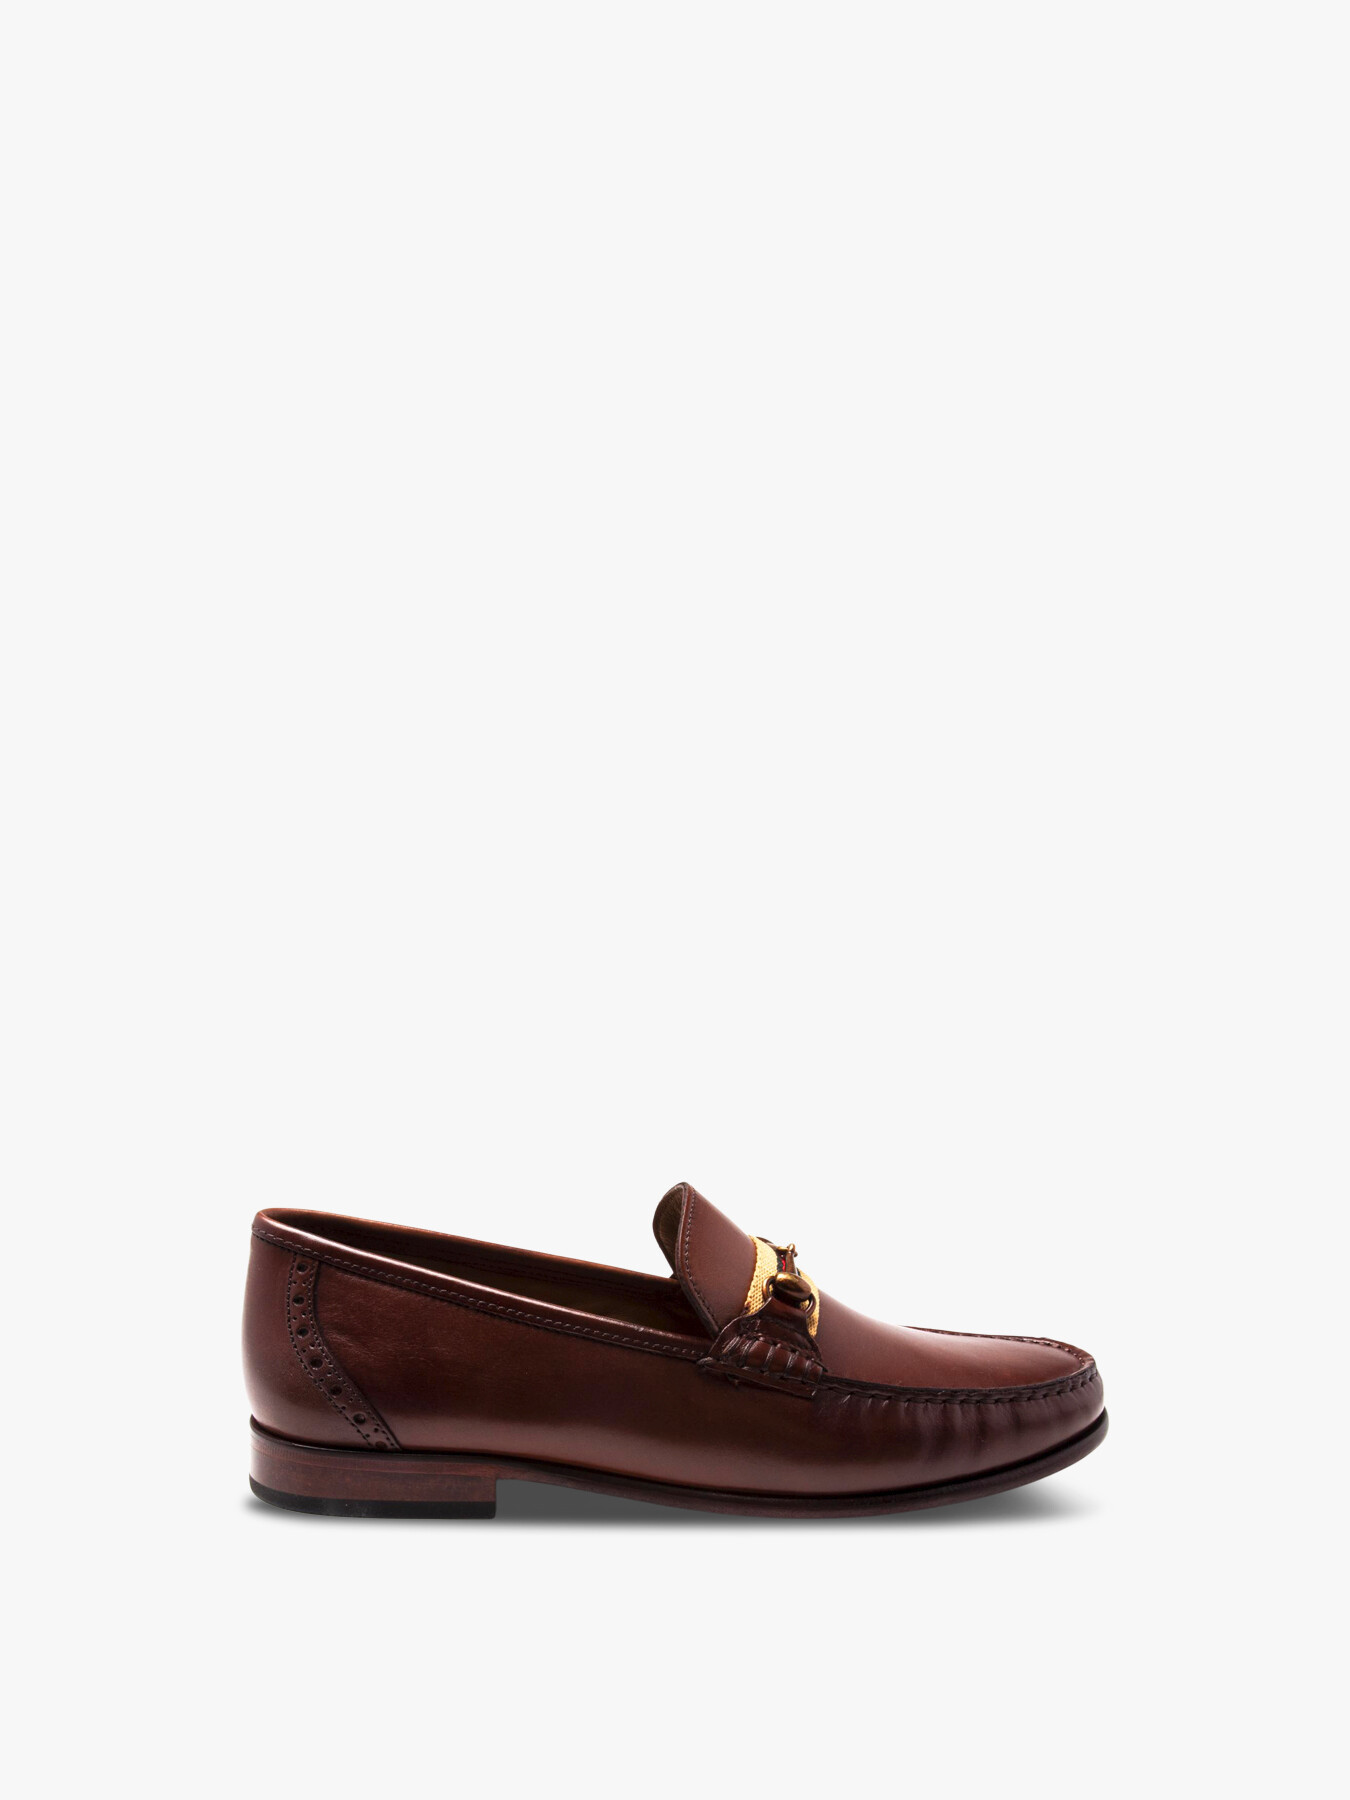 Sole Fritton Loafer Shoes Tan